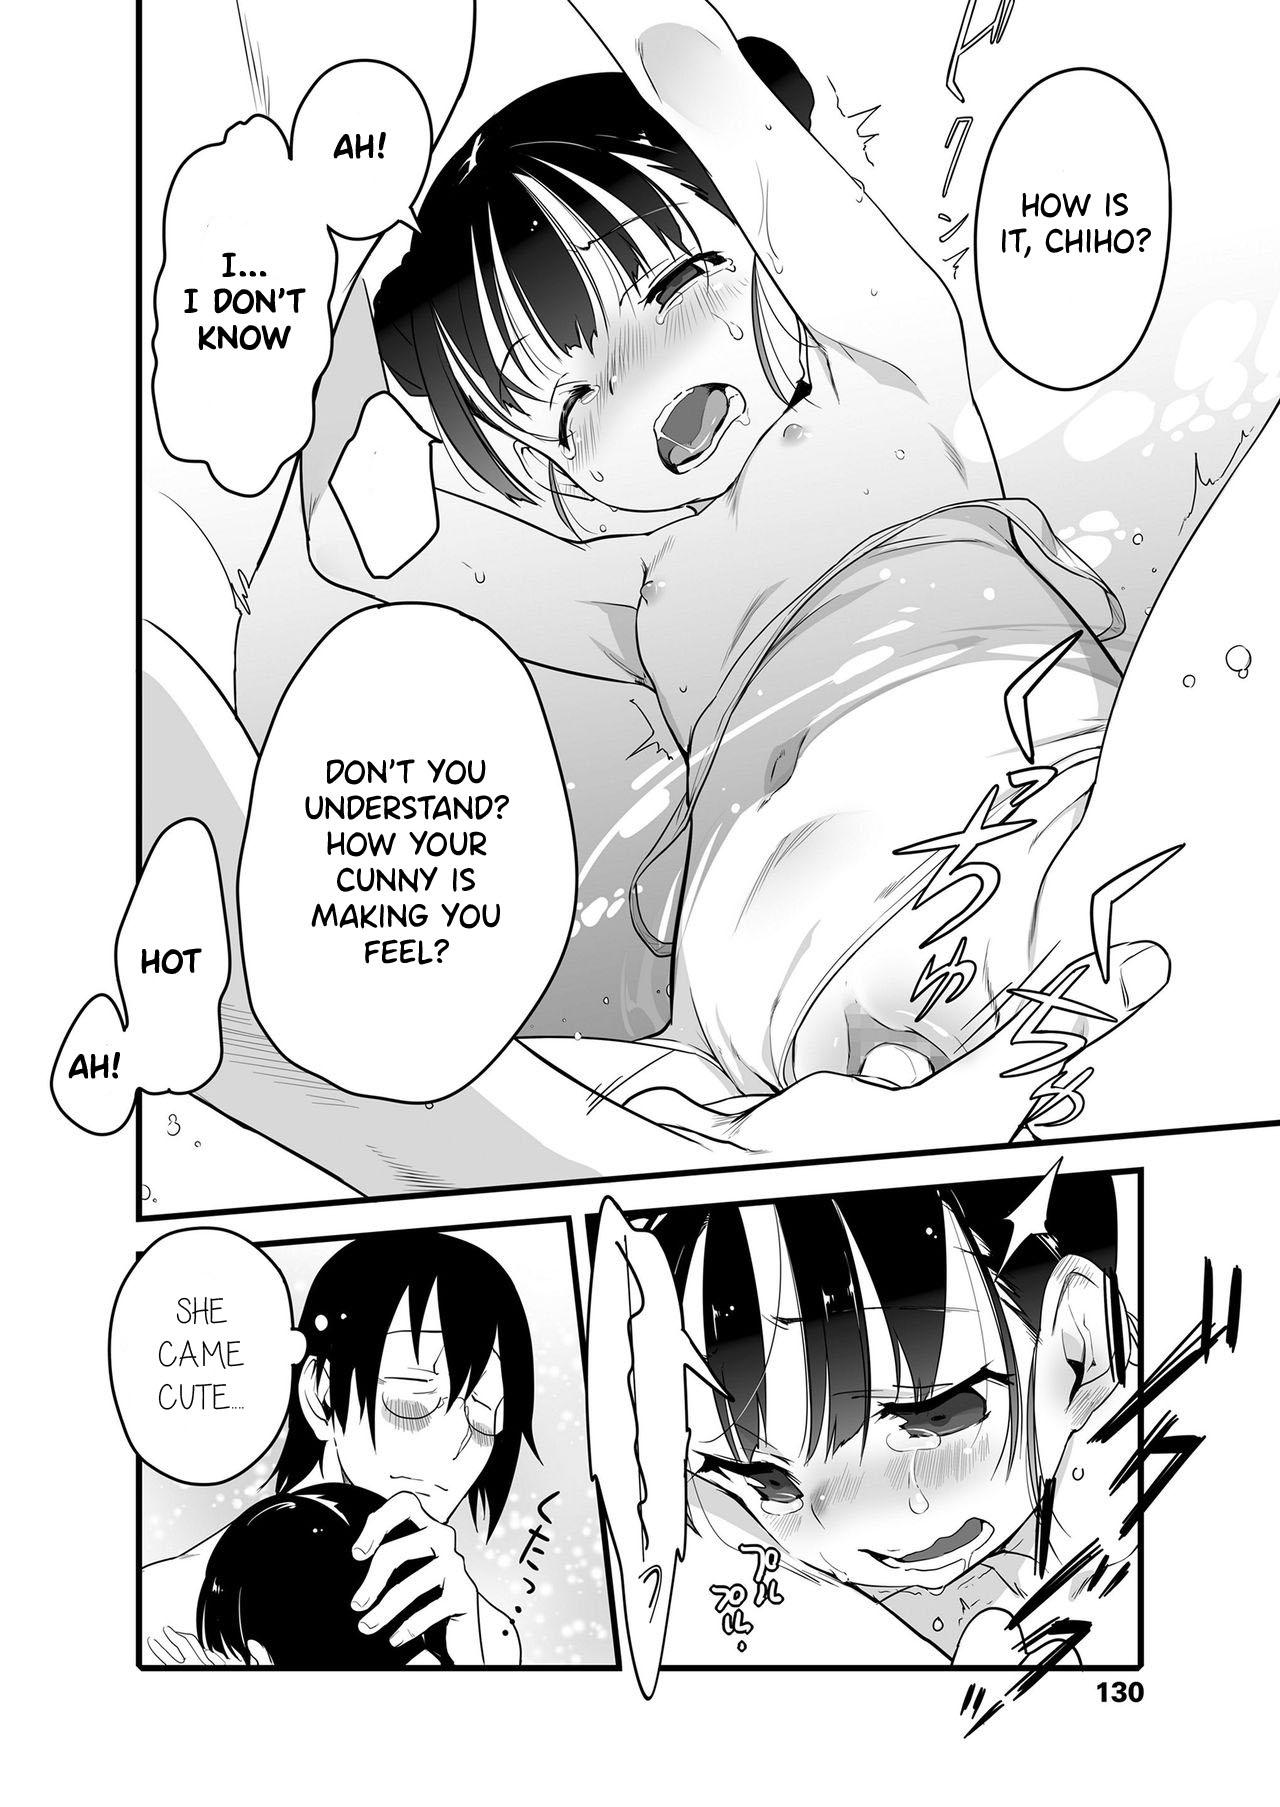 Pussylick Uchiage Hanabi, Ane to Miruka? Imouto to Miruka? | Fireworks, Should we see it with the elder sister or the younger sister? Squirting - Page 12